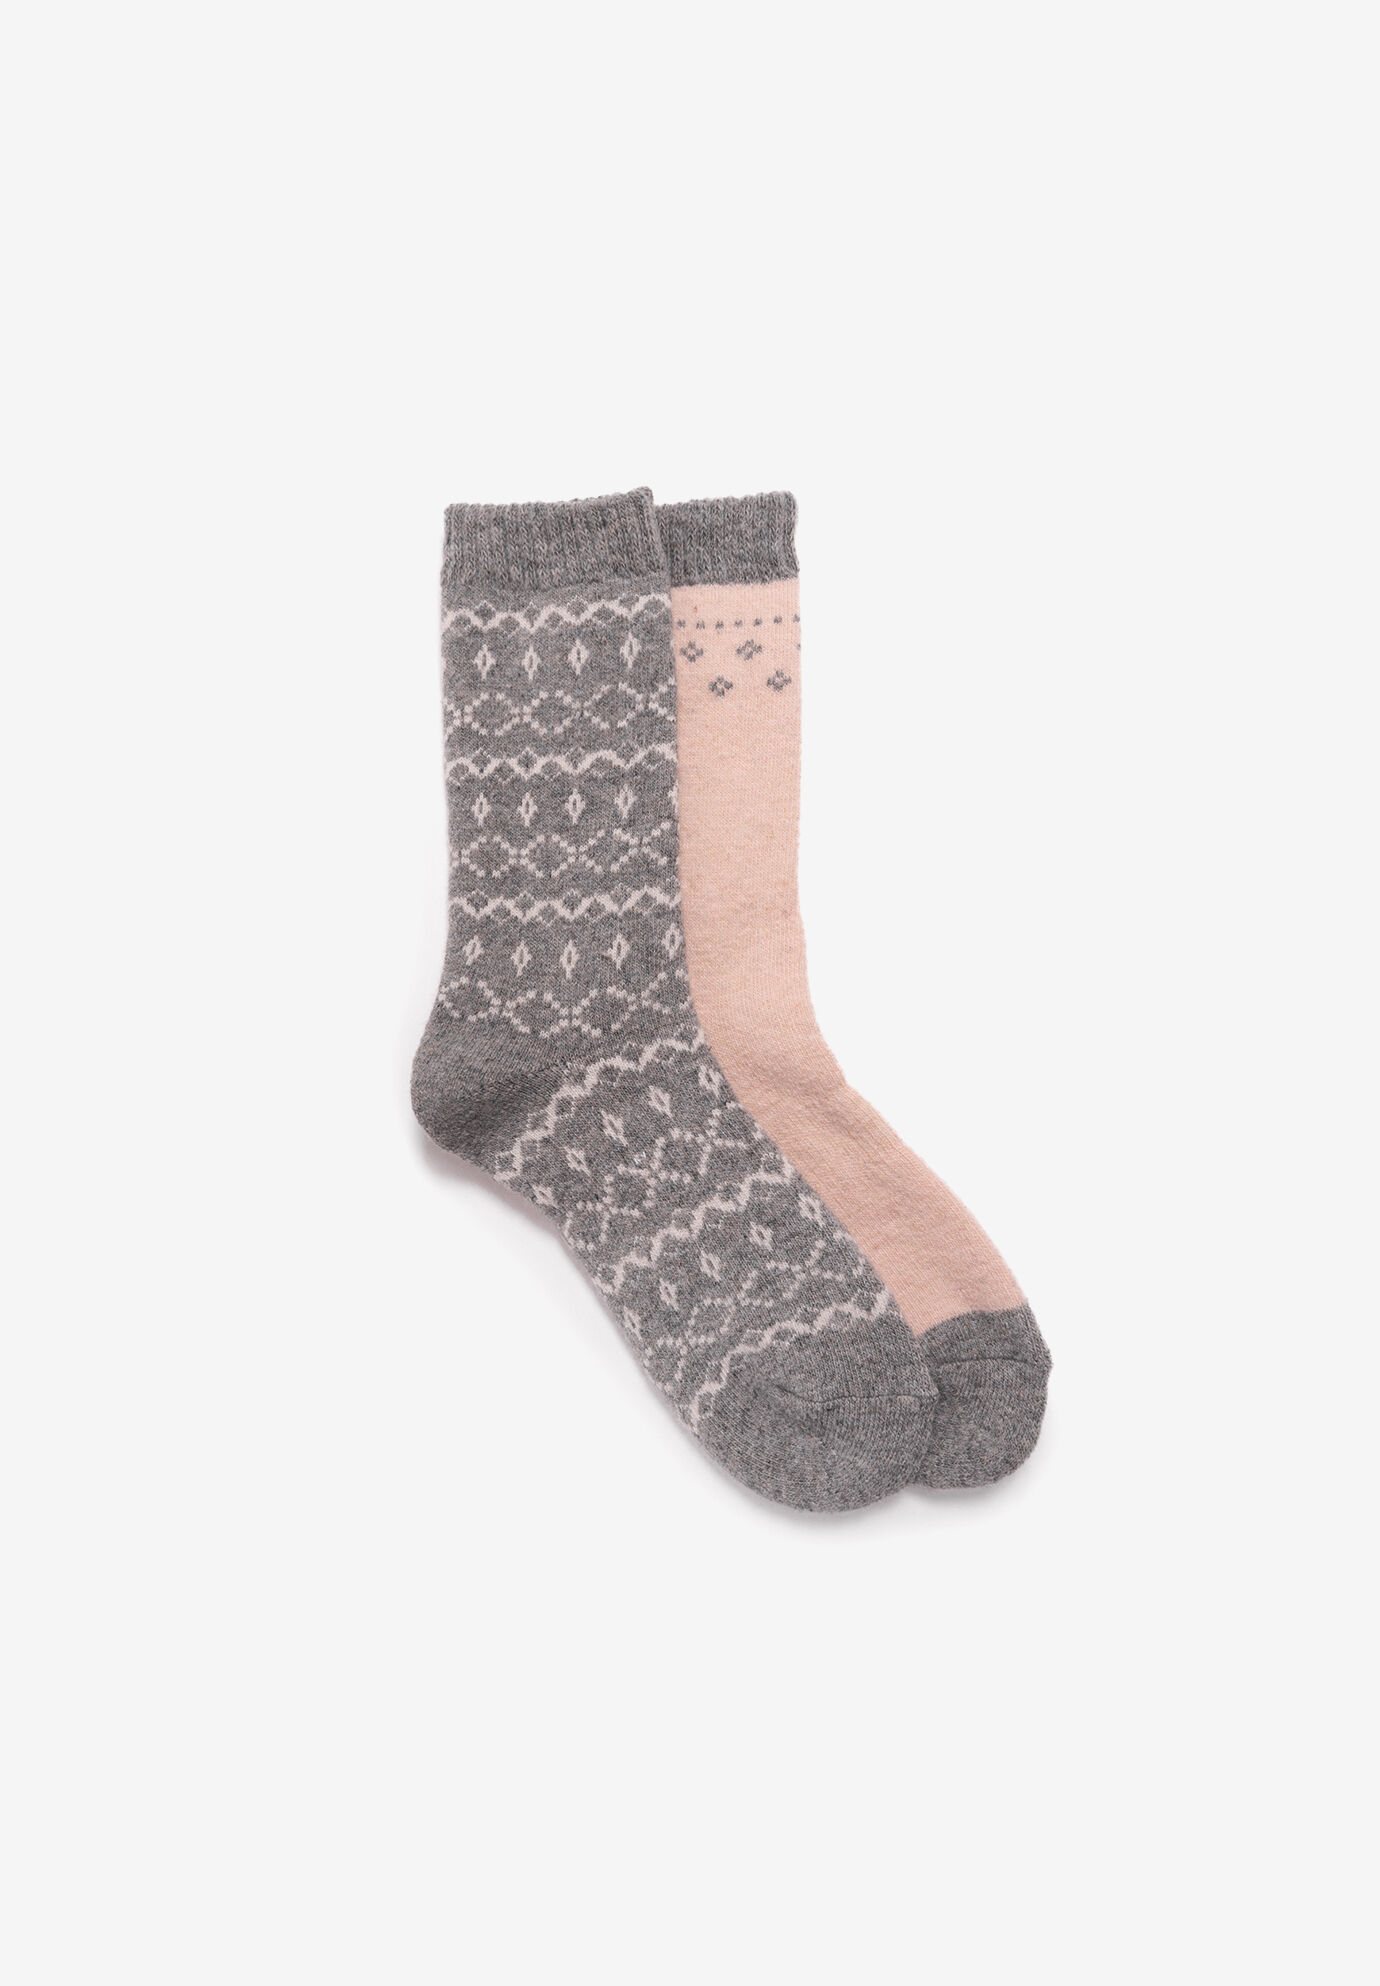 Women's 2 Pair Pack Wool Boot Socks by MUK LUKS in Ash Salmon (Size ONE)